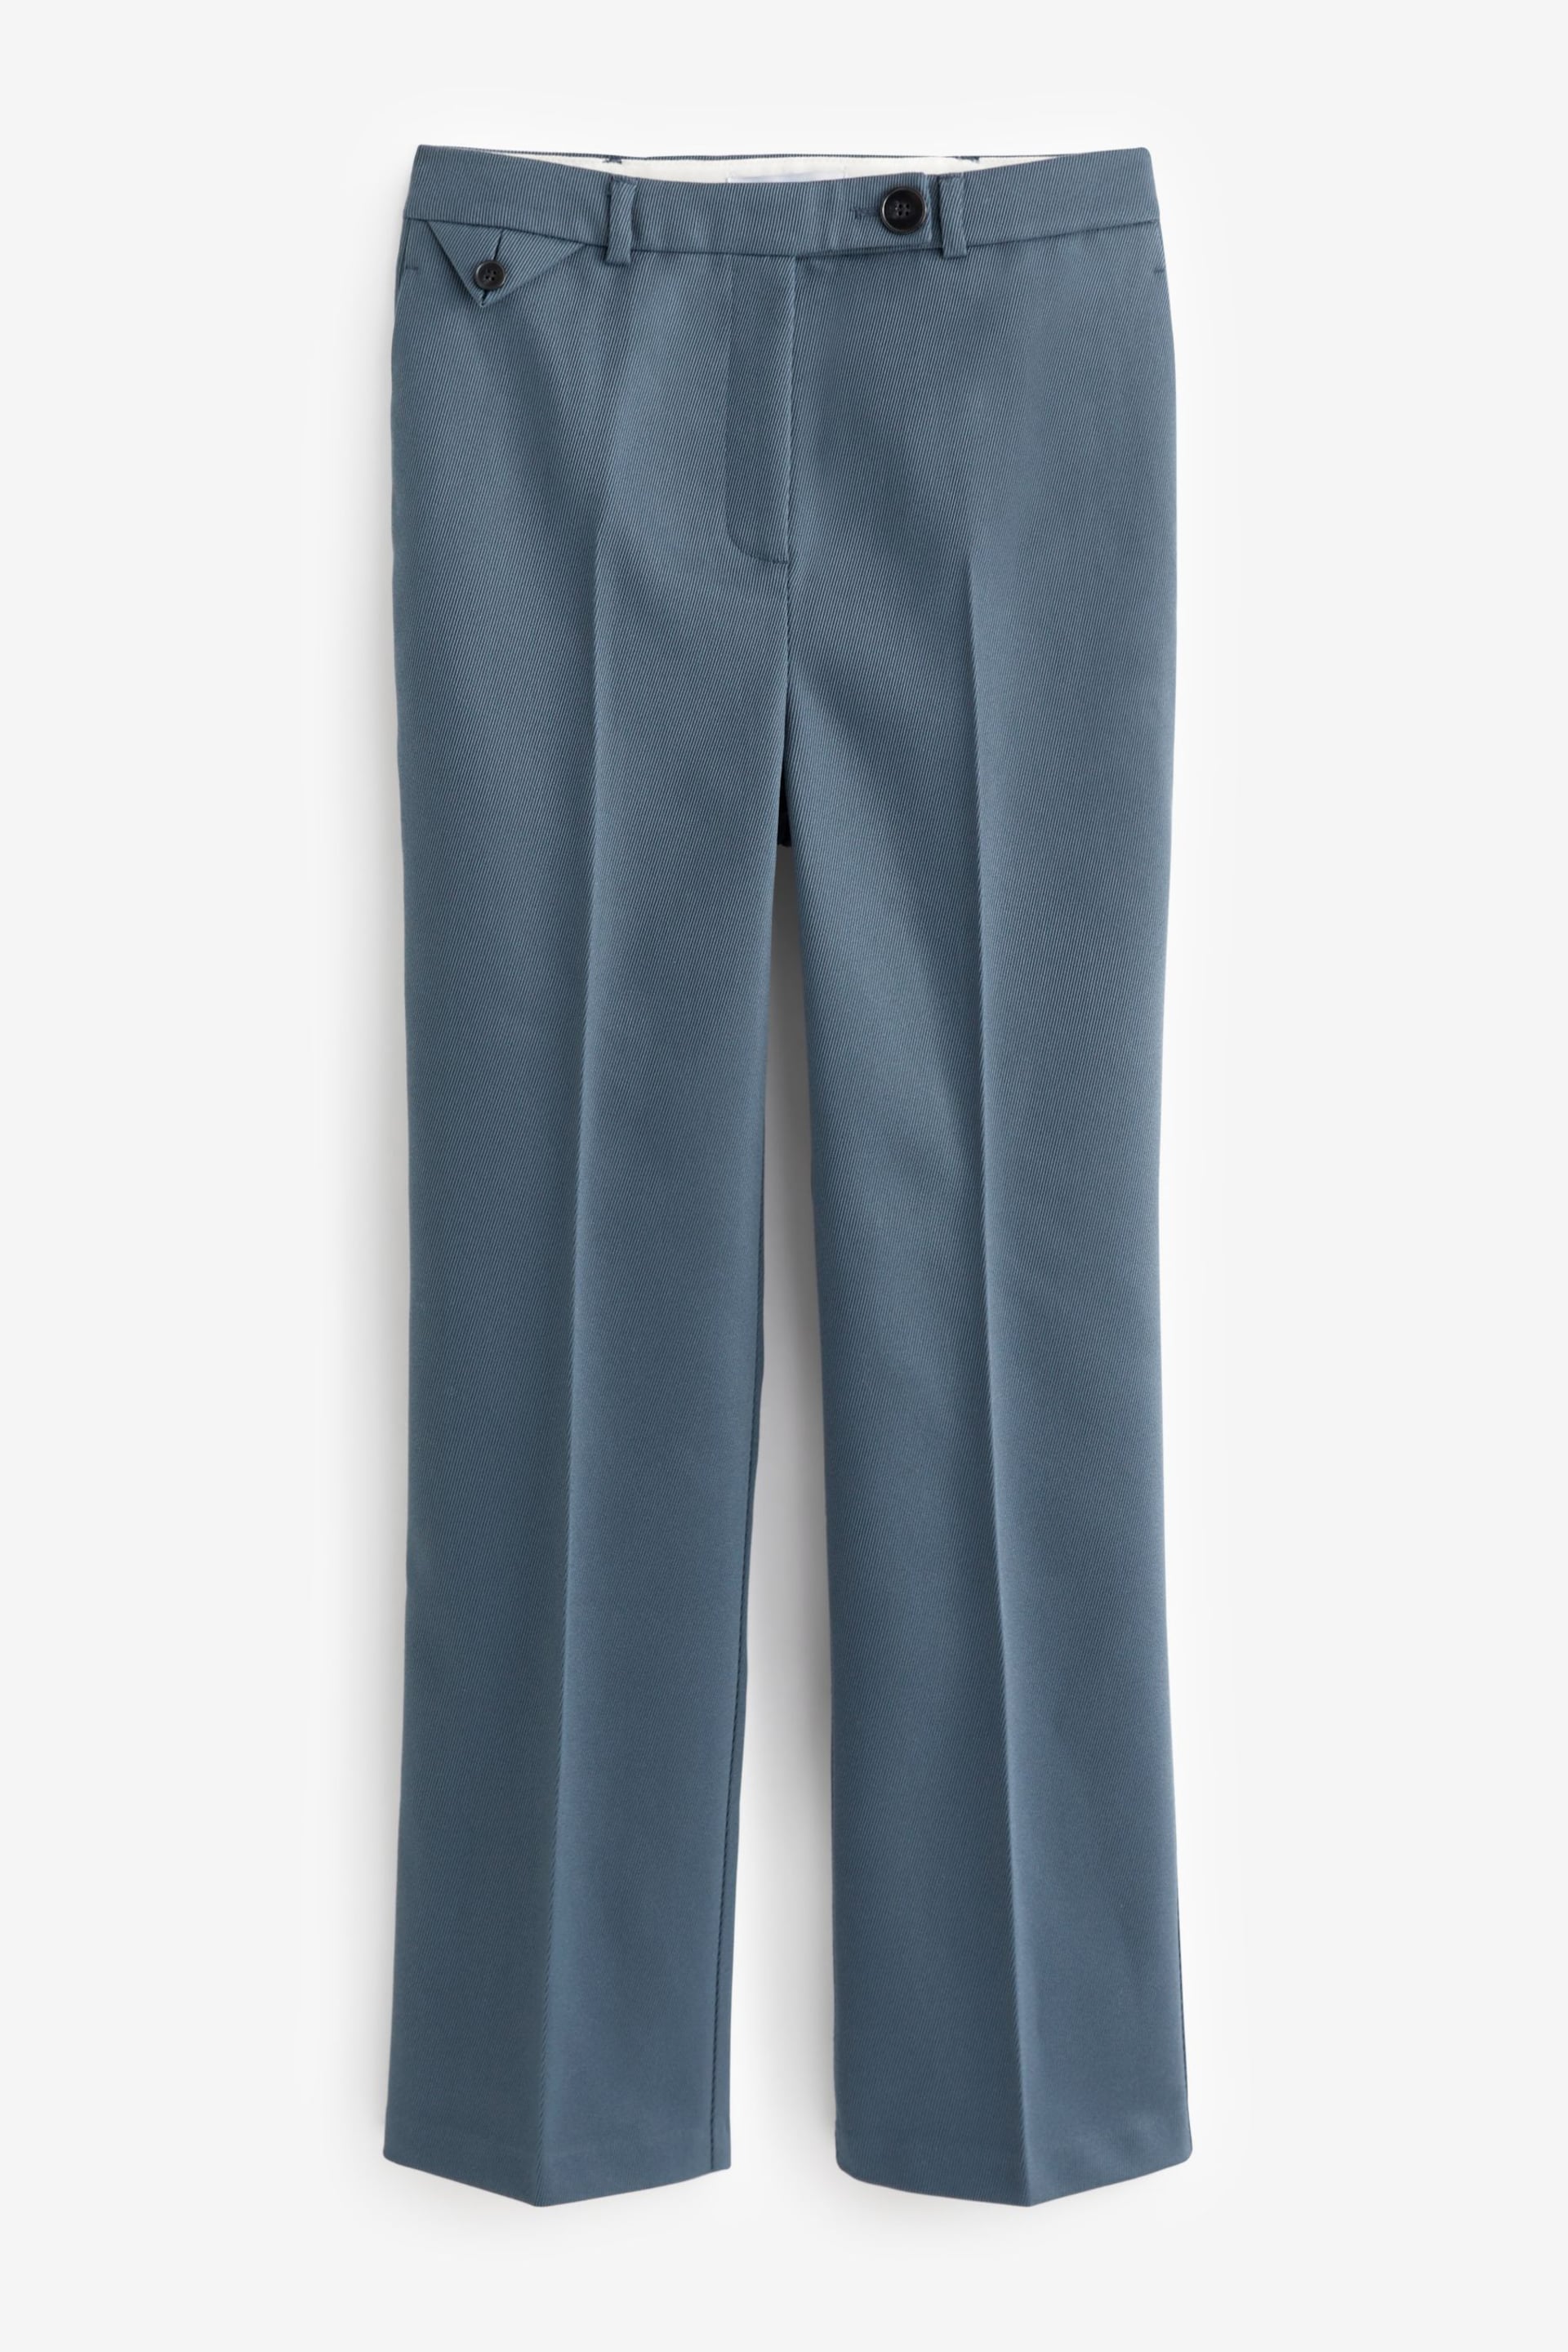 Blue Tailored Twill Straight Leg Trousers - Image 6 of 7